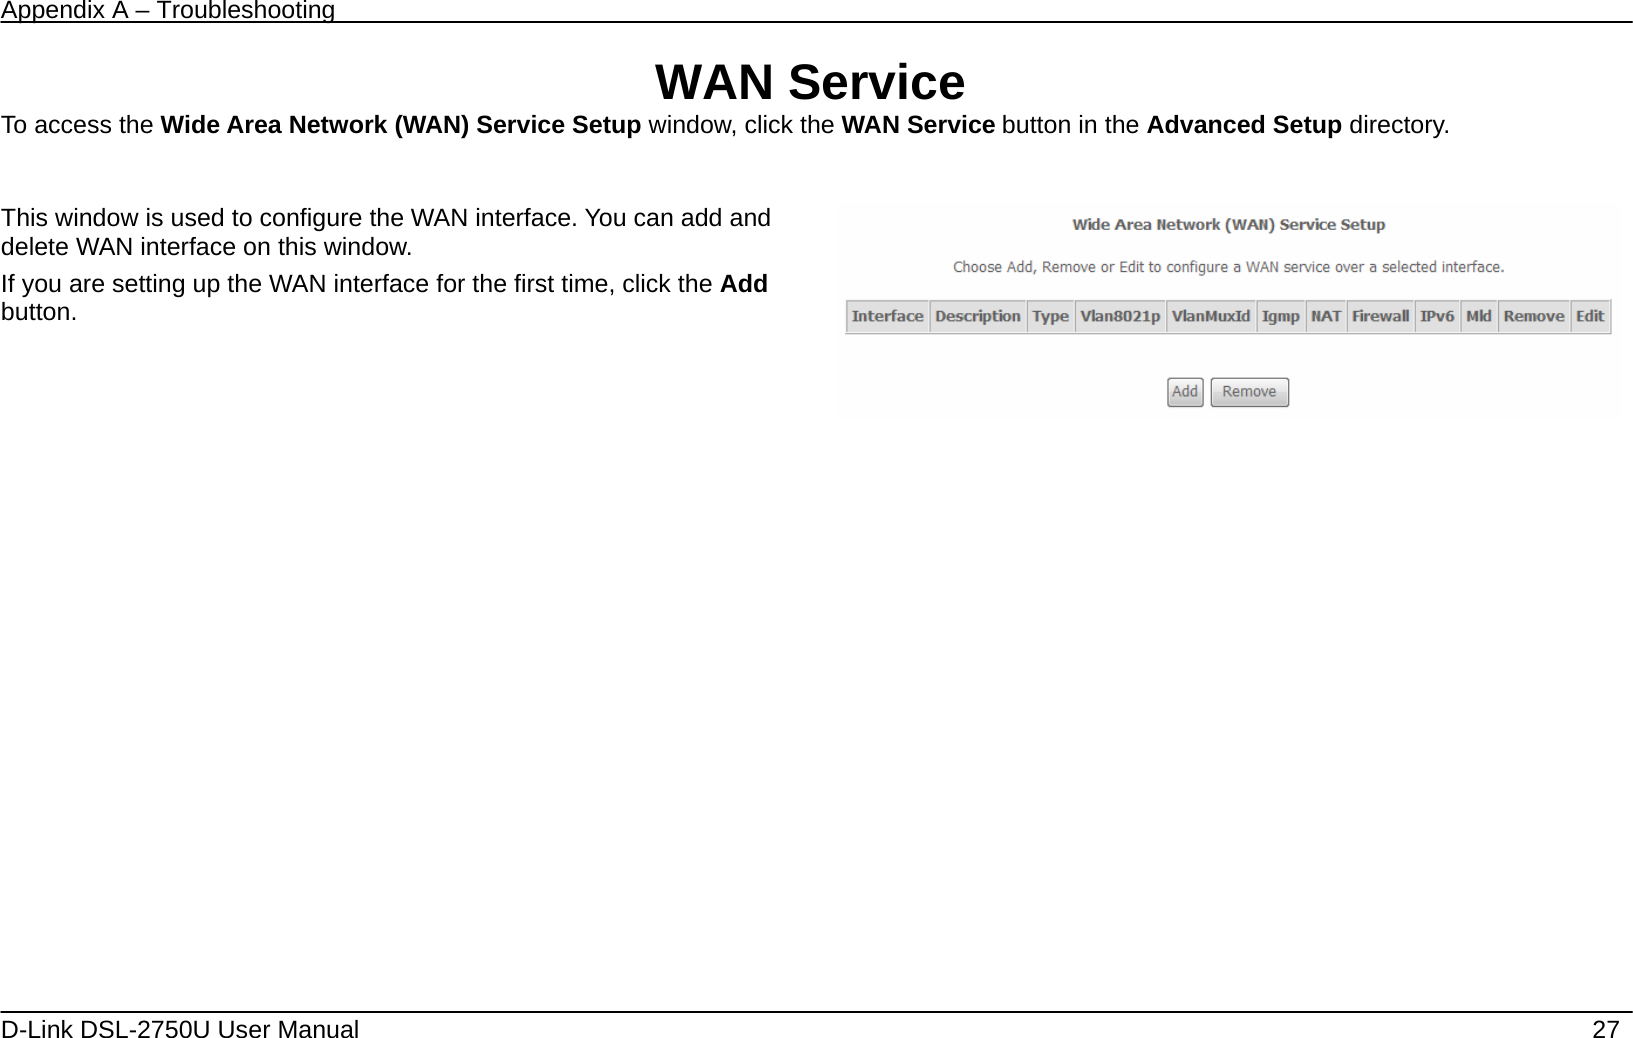 Appendix A – Troubleshooting   D-Link DSL-2750U User Manual    27 WAN Service To access the Wide Area Network (WAN) Service Setup window, click the WAN Service button in the Advanced Setup directory.  This window is used to configure the WAN interface. You can add and delete WAN interface on this window.   If you are setting up the WAN interface for the first time, click the Add button.                